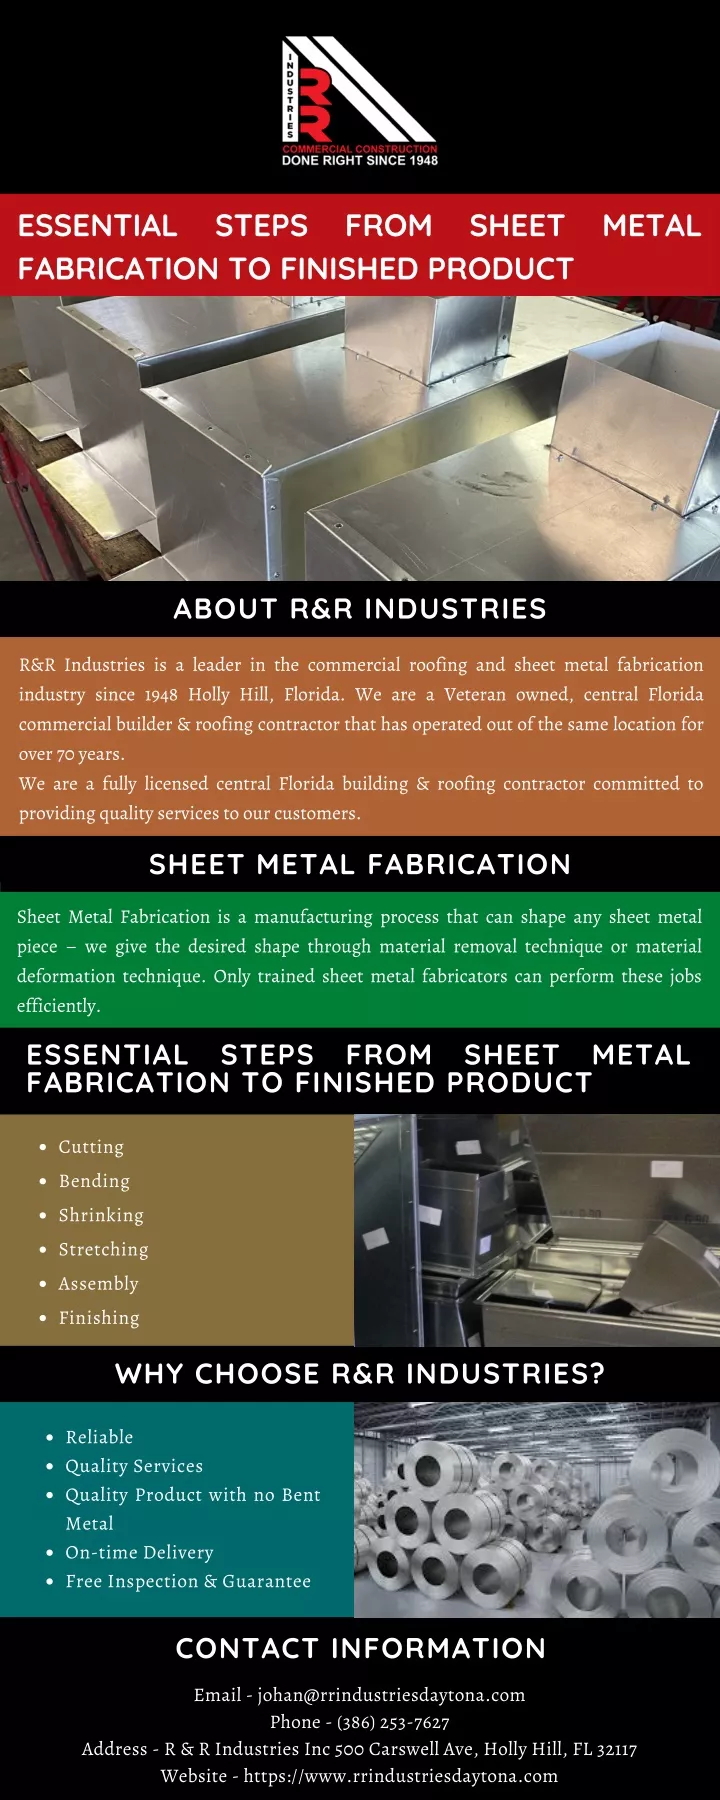 essential steps from sheet metal fabrication